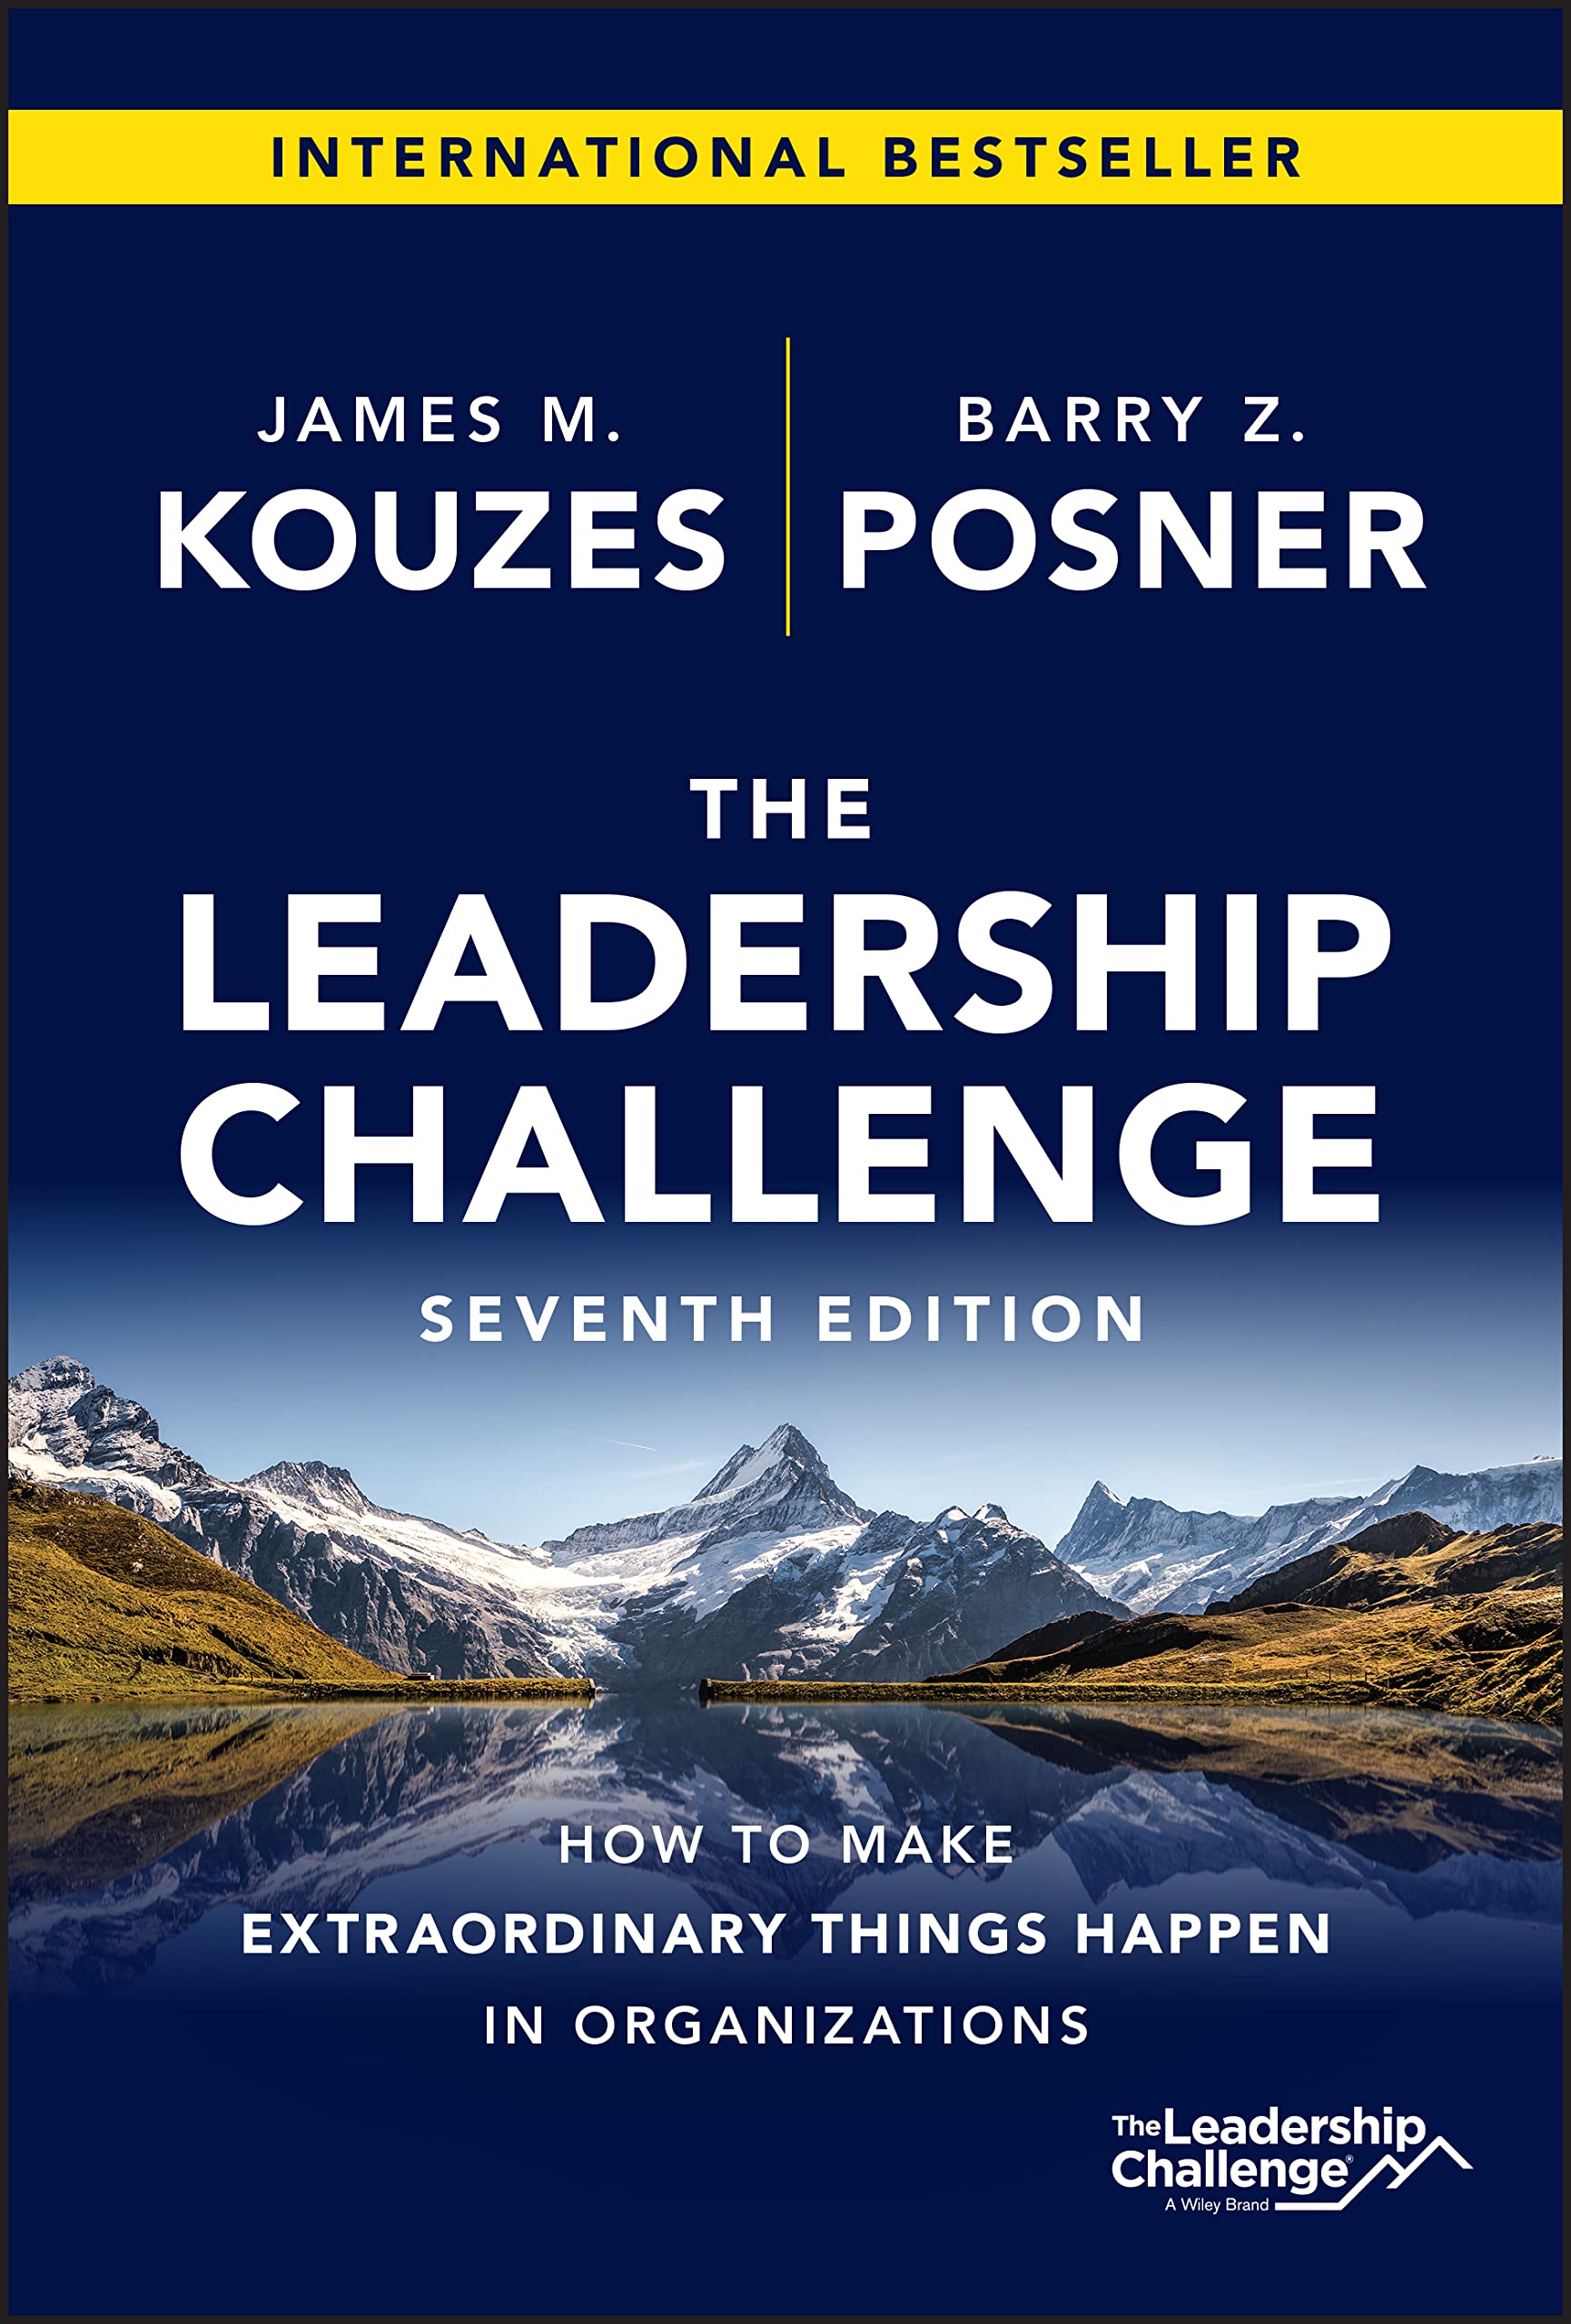 The Leadership Challenge: How to Make Extraordinary Things Happen in Organizations by Kouzes, James M.